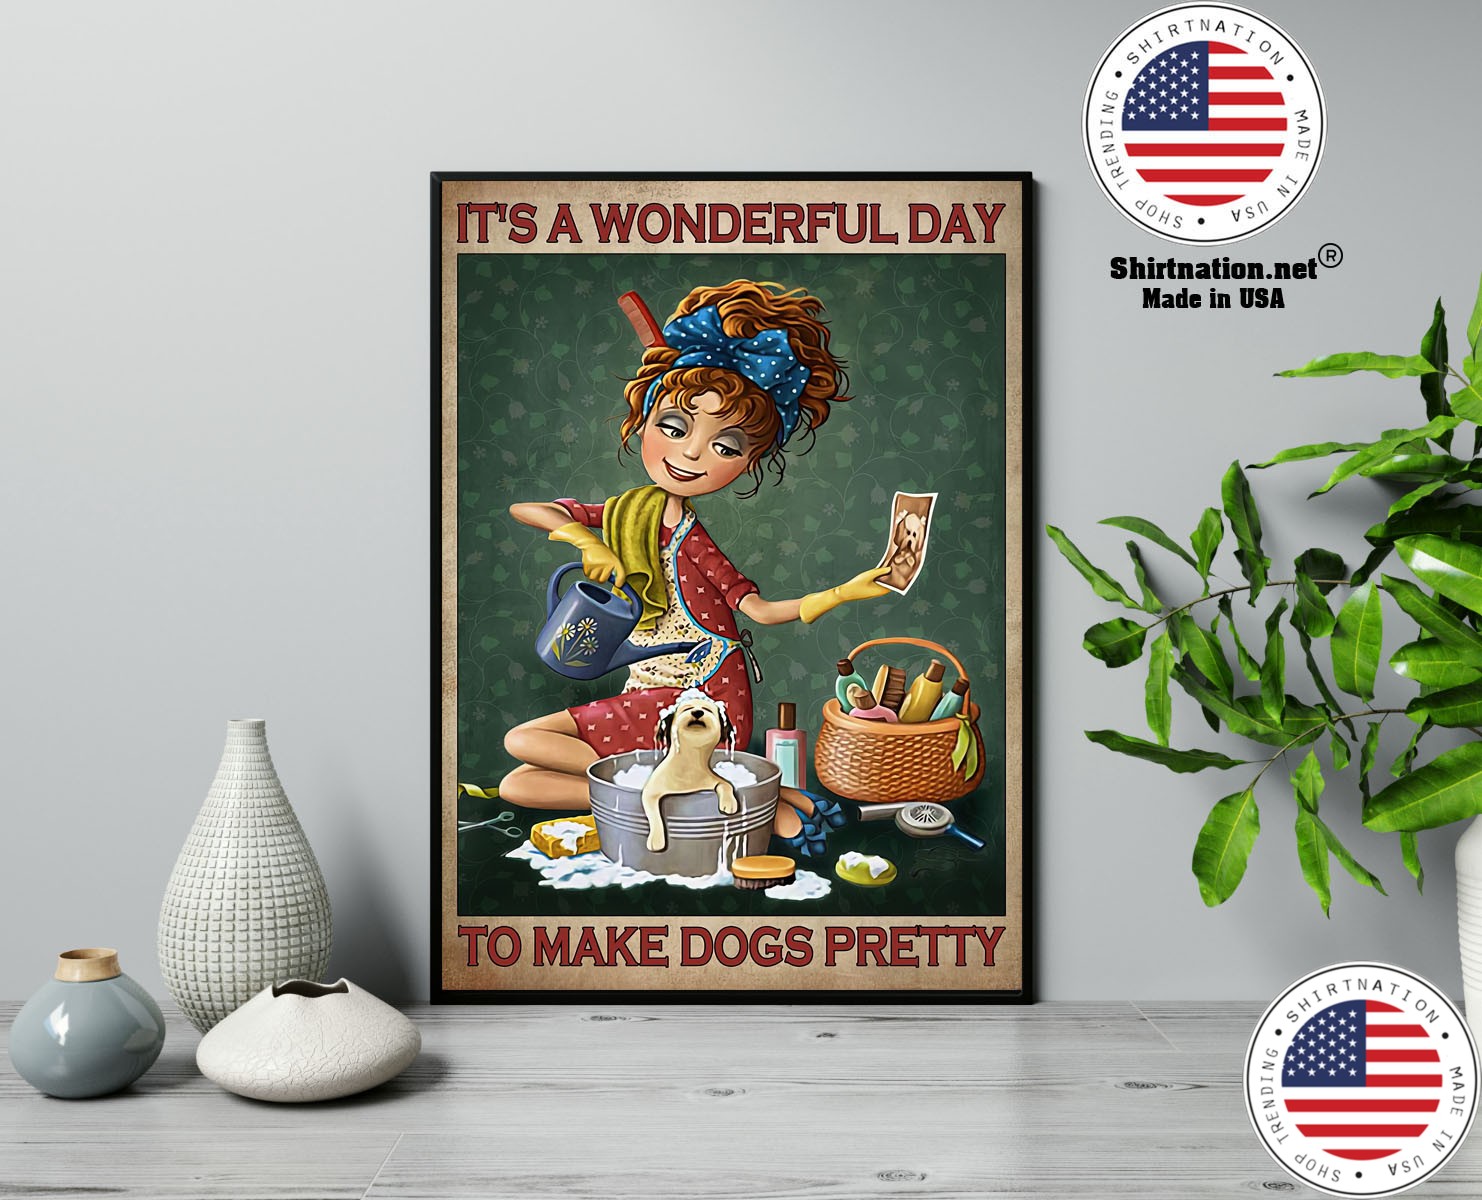 Grooming Its a wonderful day to make dogs pretty poster 13